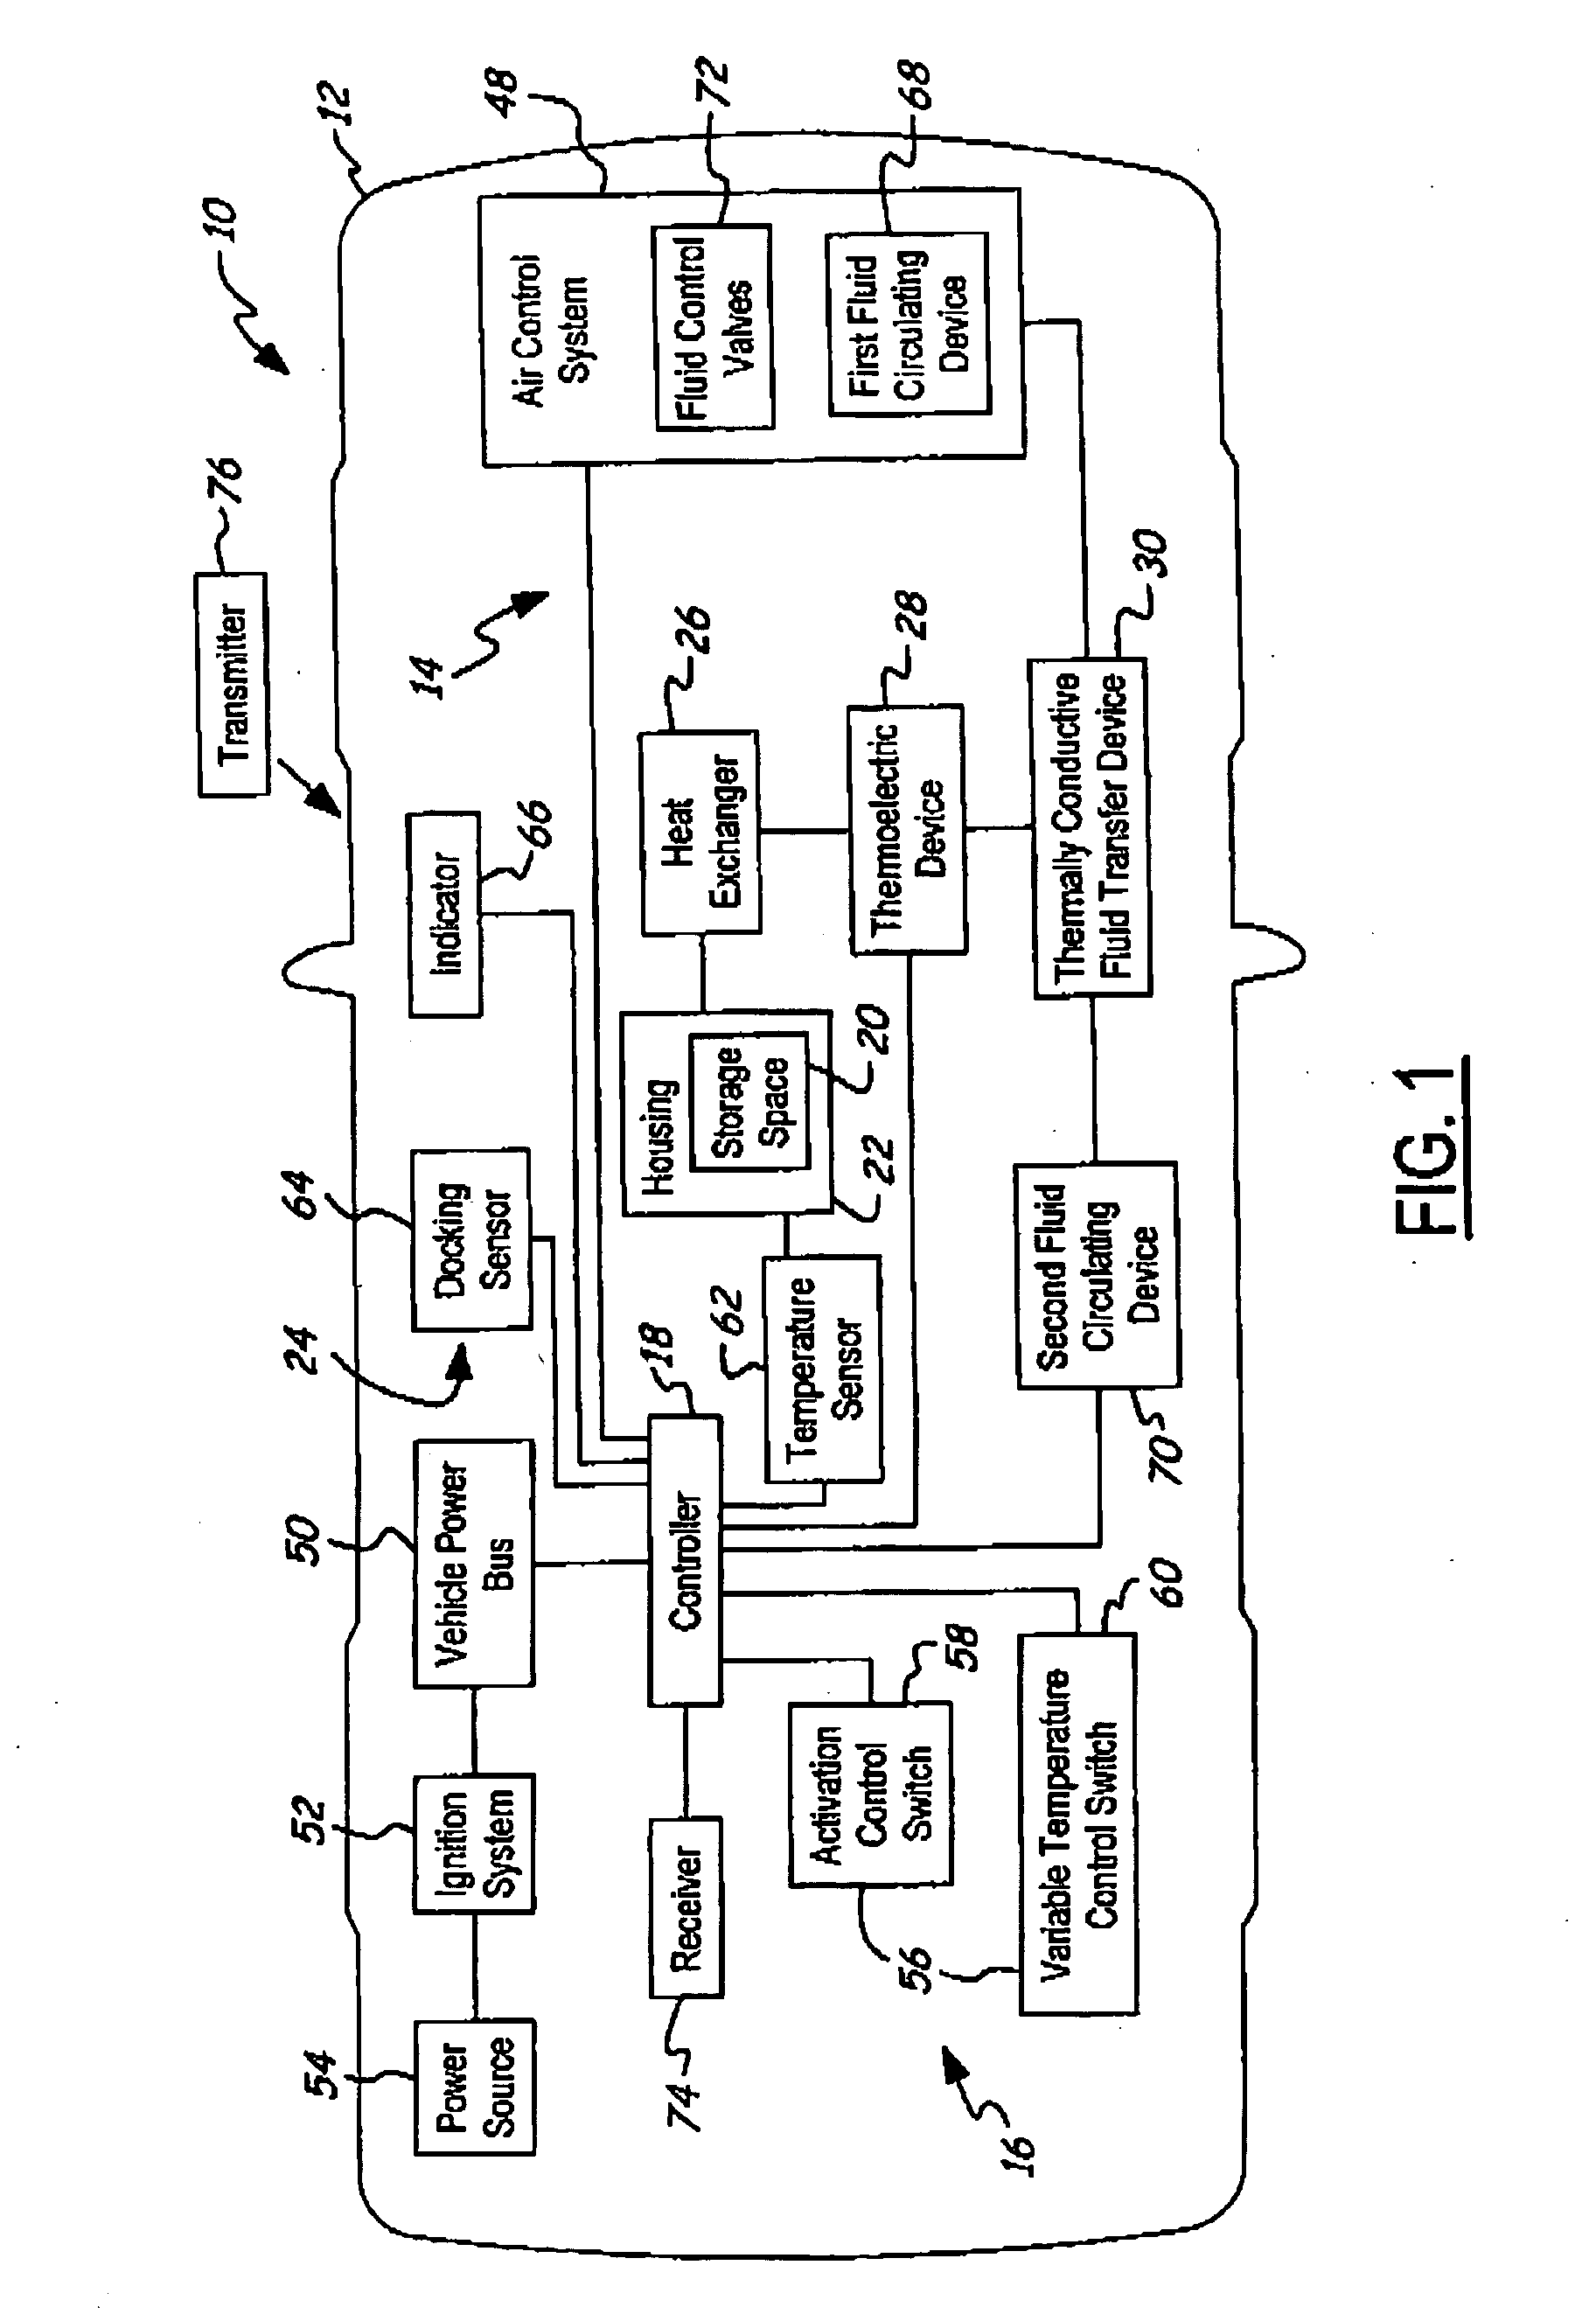 Thermally controlled storage space system for an interior cabin of a vehicle